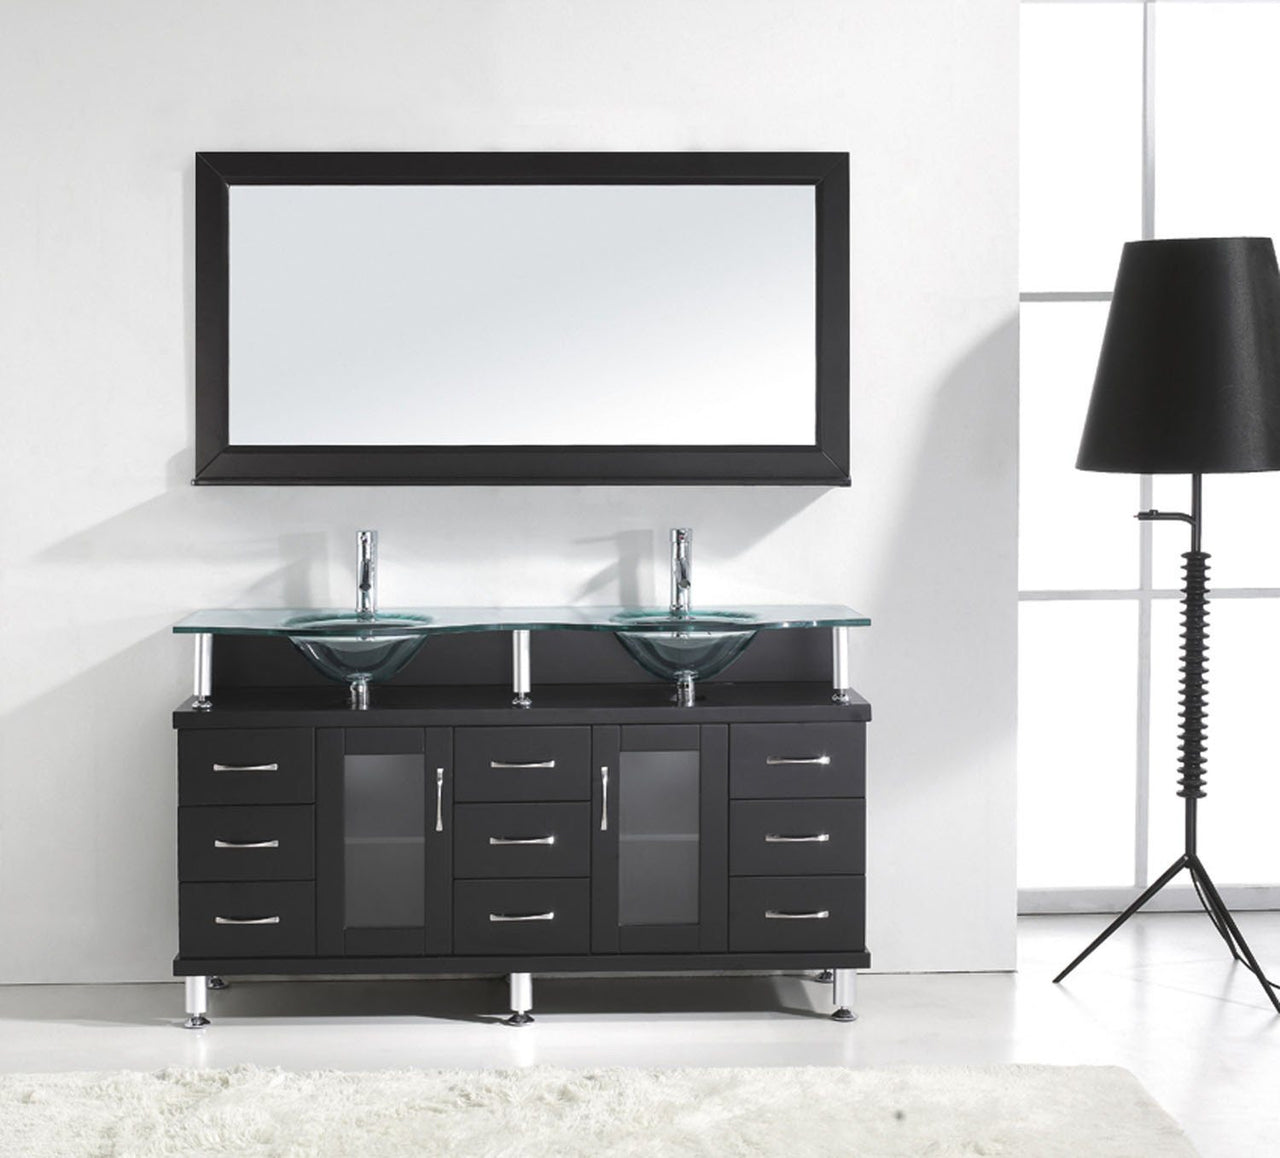 Virtu USA Vincente Rocco 59" Double Round Sink Espresso Top Vanity with Brushed Nickel Faucet and Mirror Vanity Virtu USA 